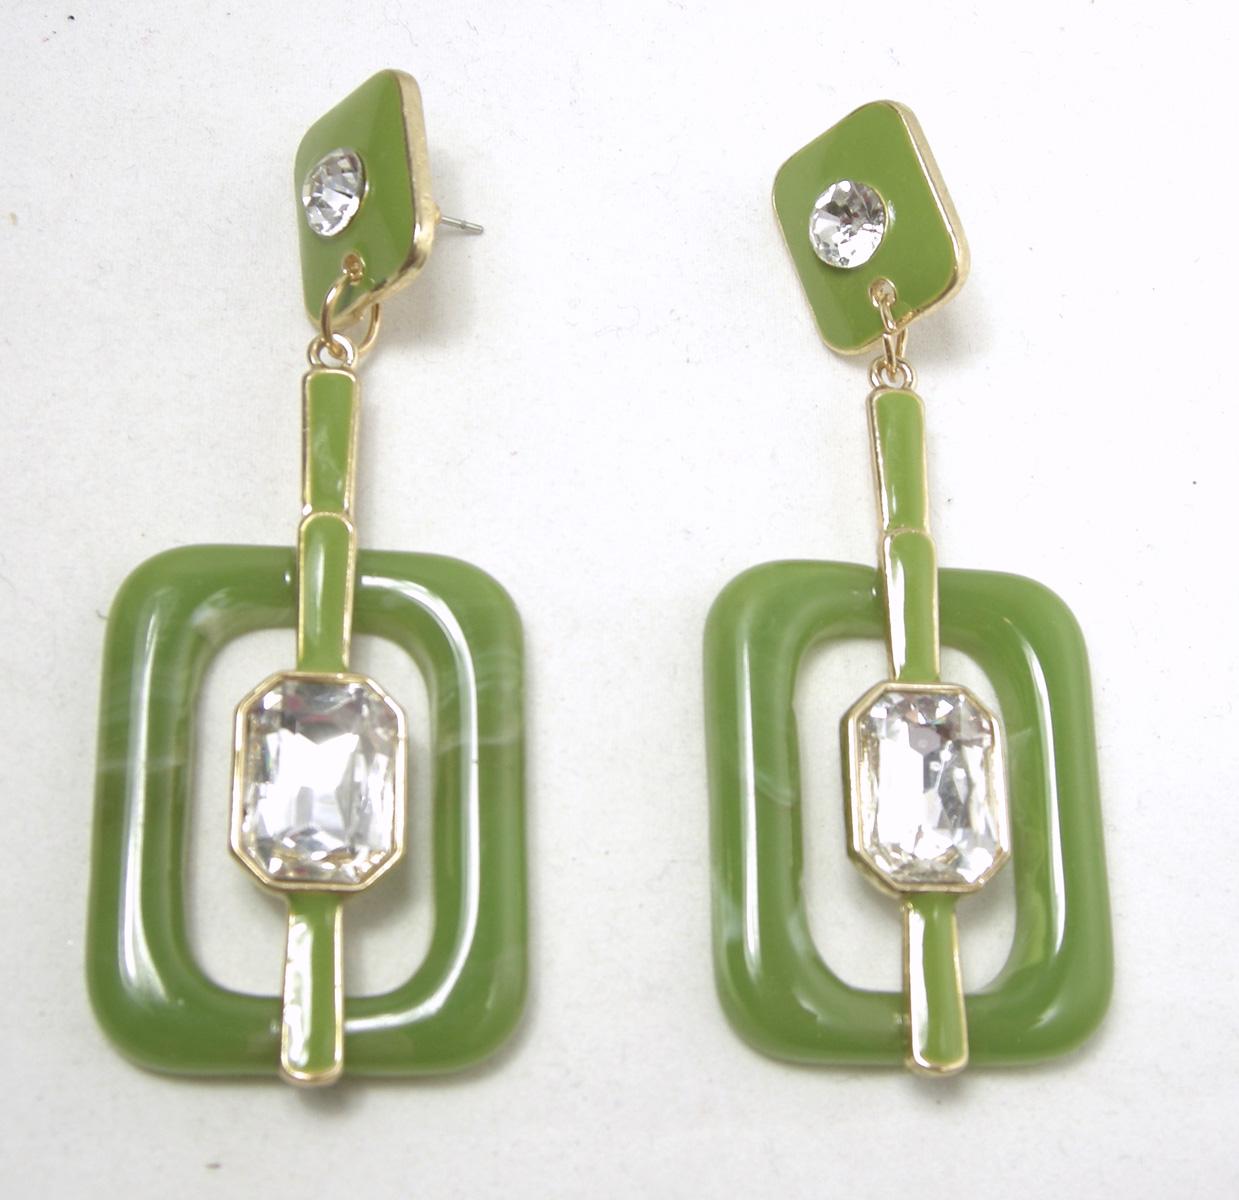 These beautiful vintage Feng Shui faux jade pierced earrings have the Art Deco Asian motif.  The square faux jade top has a round rhinestone center that leads down to a rectangular opening that has a bar in the center with a large rhinestone center.